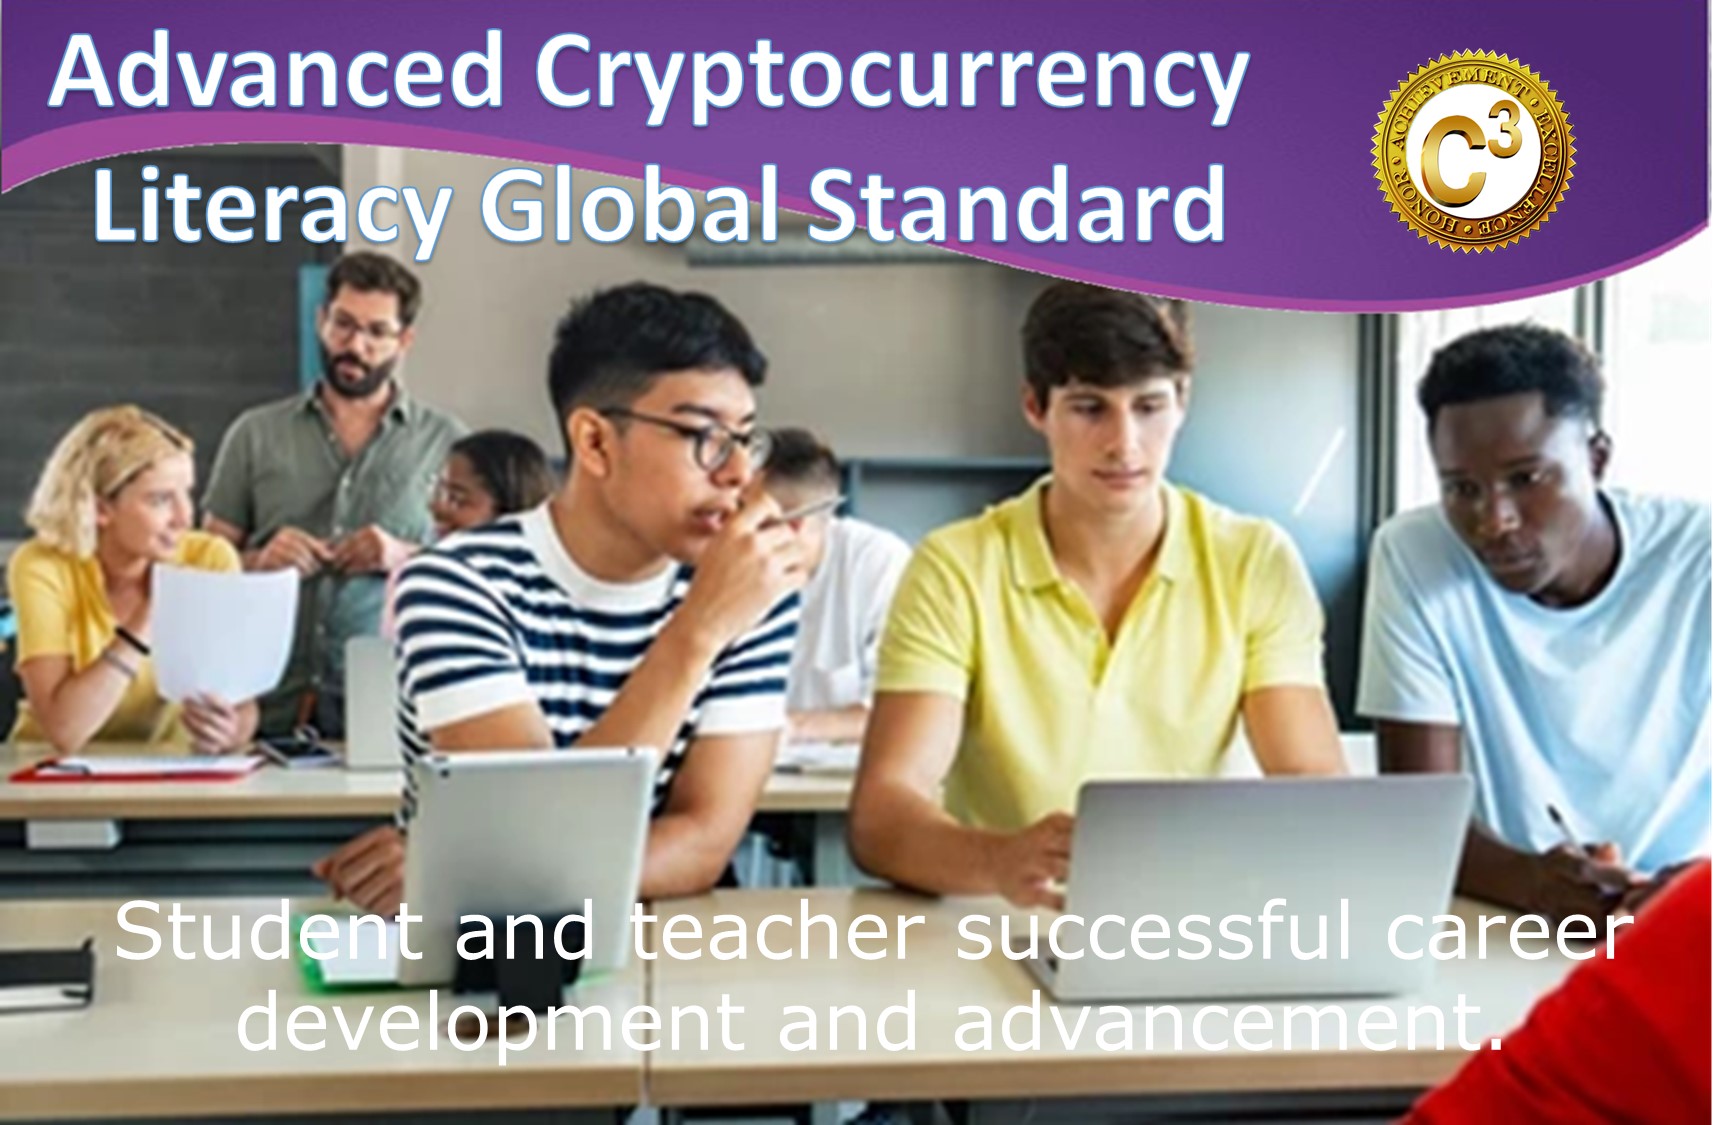 Certify C3 Advanced Cryptocurrency Literacy Global Standards